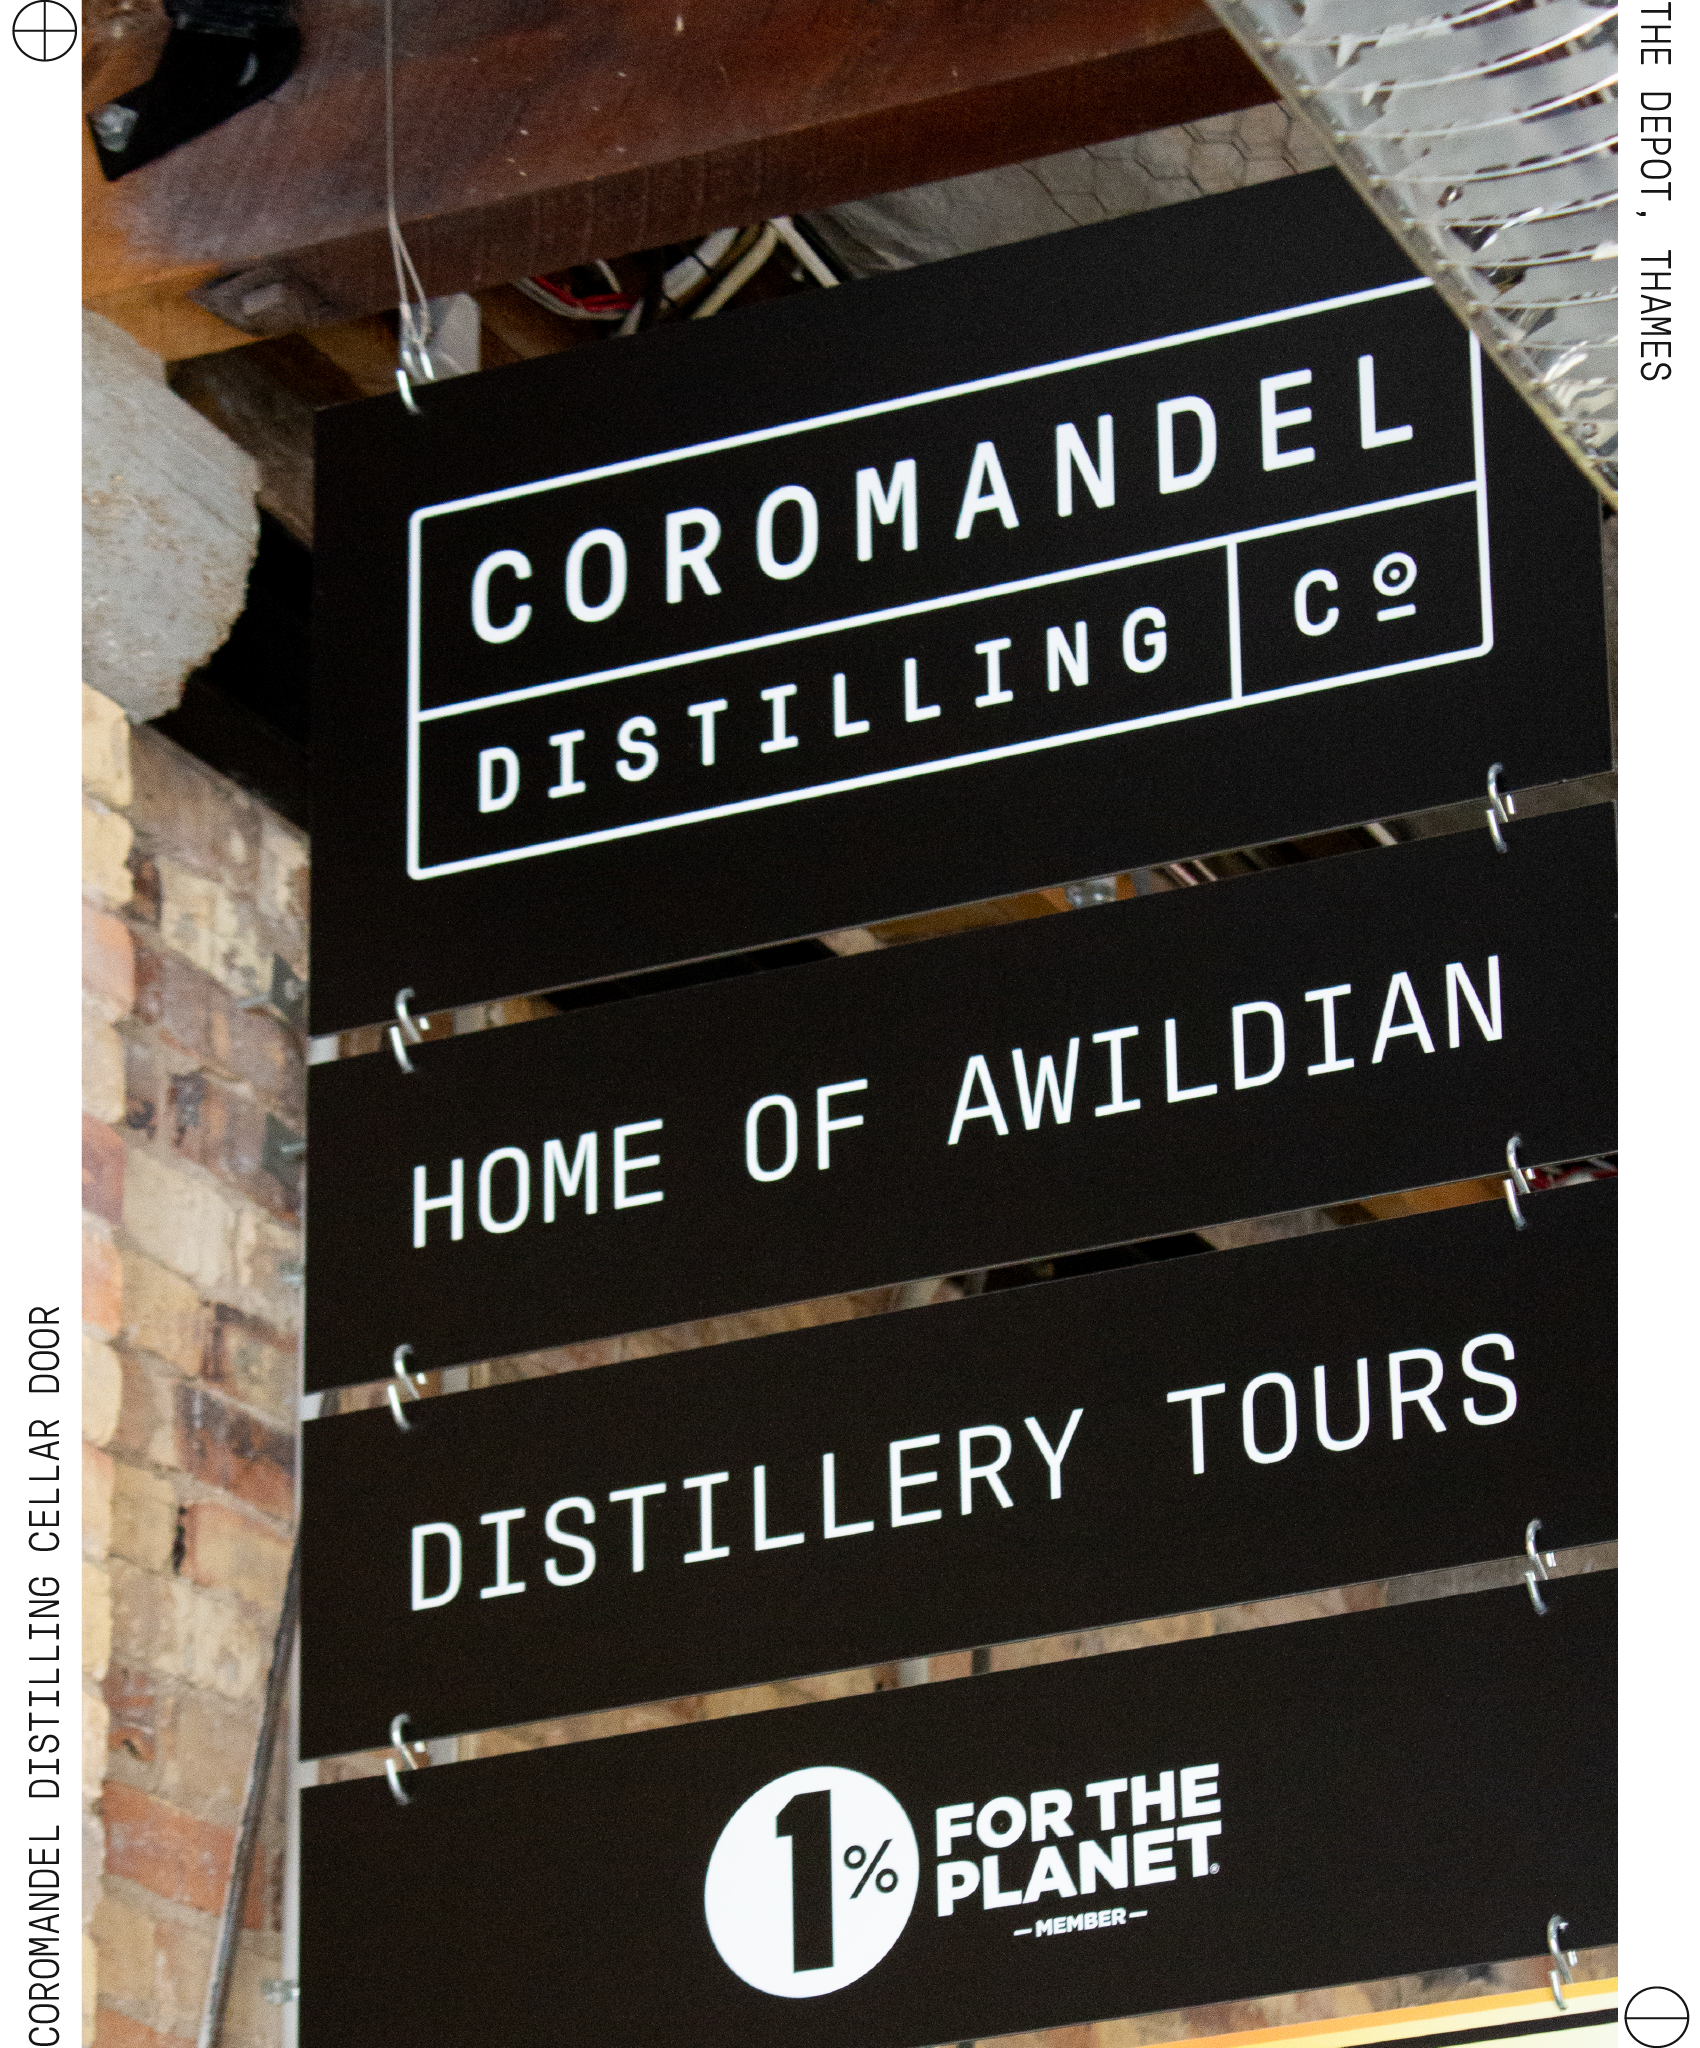 The Coromandel Distilling Company is based in Thames, where you can visit our tasting room and cellar door